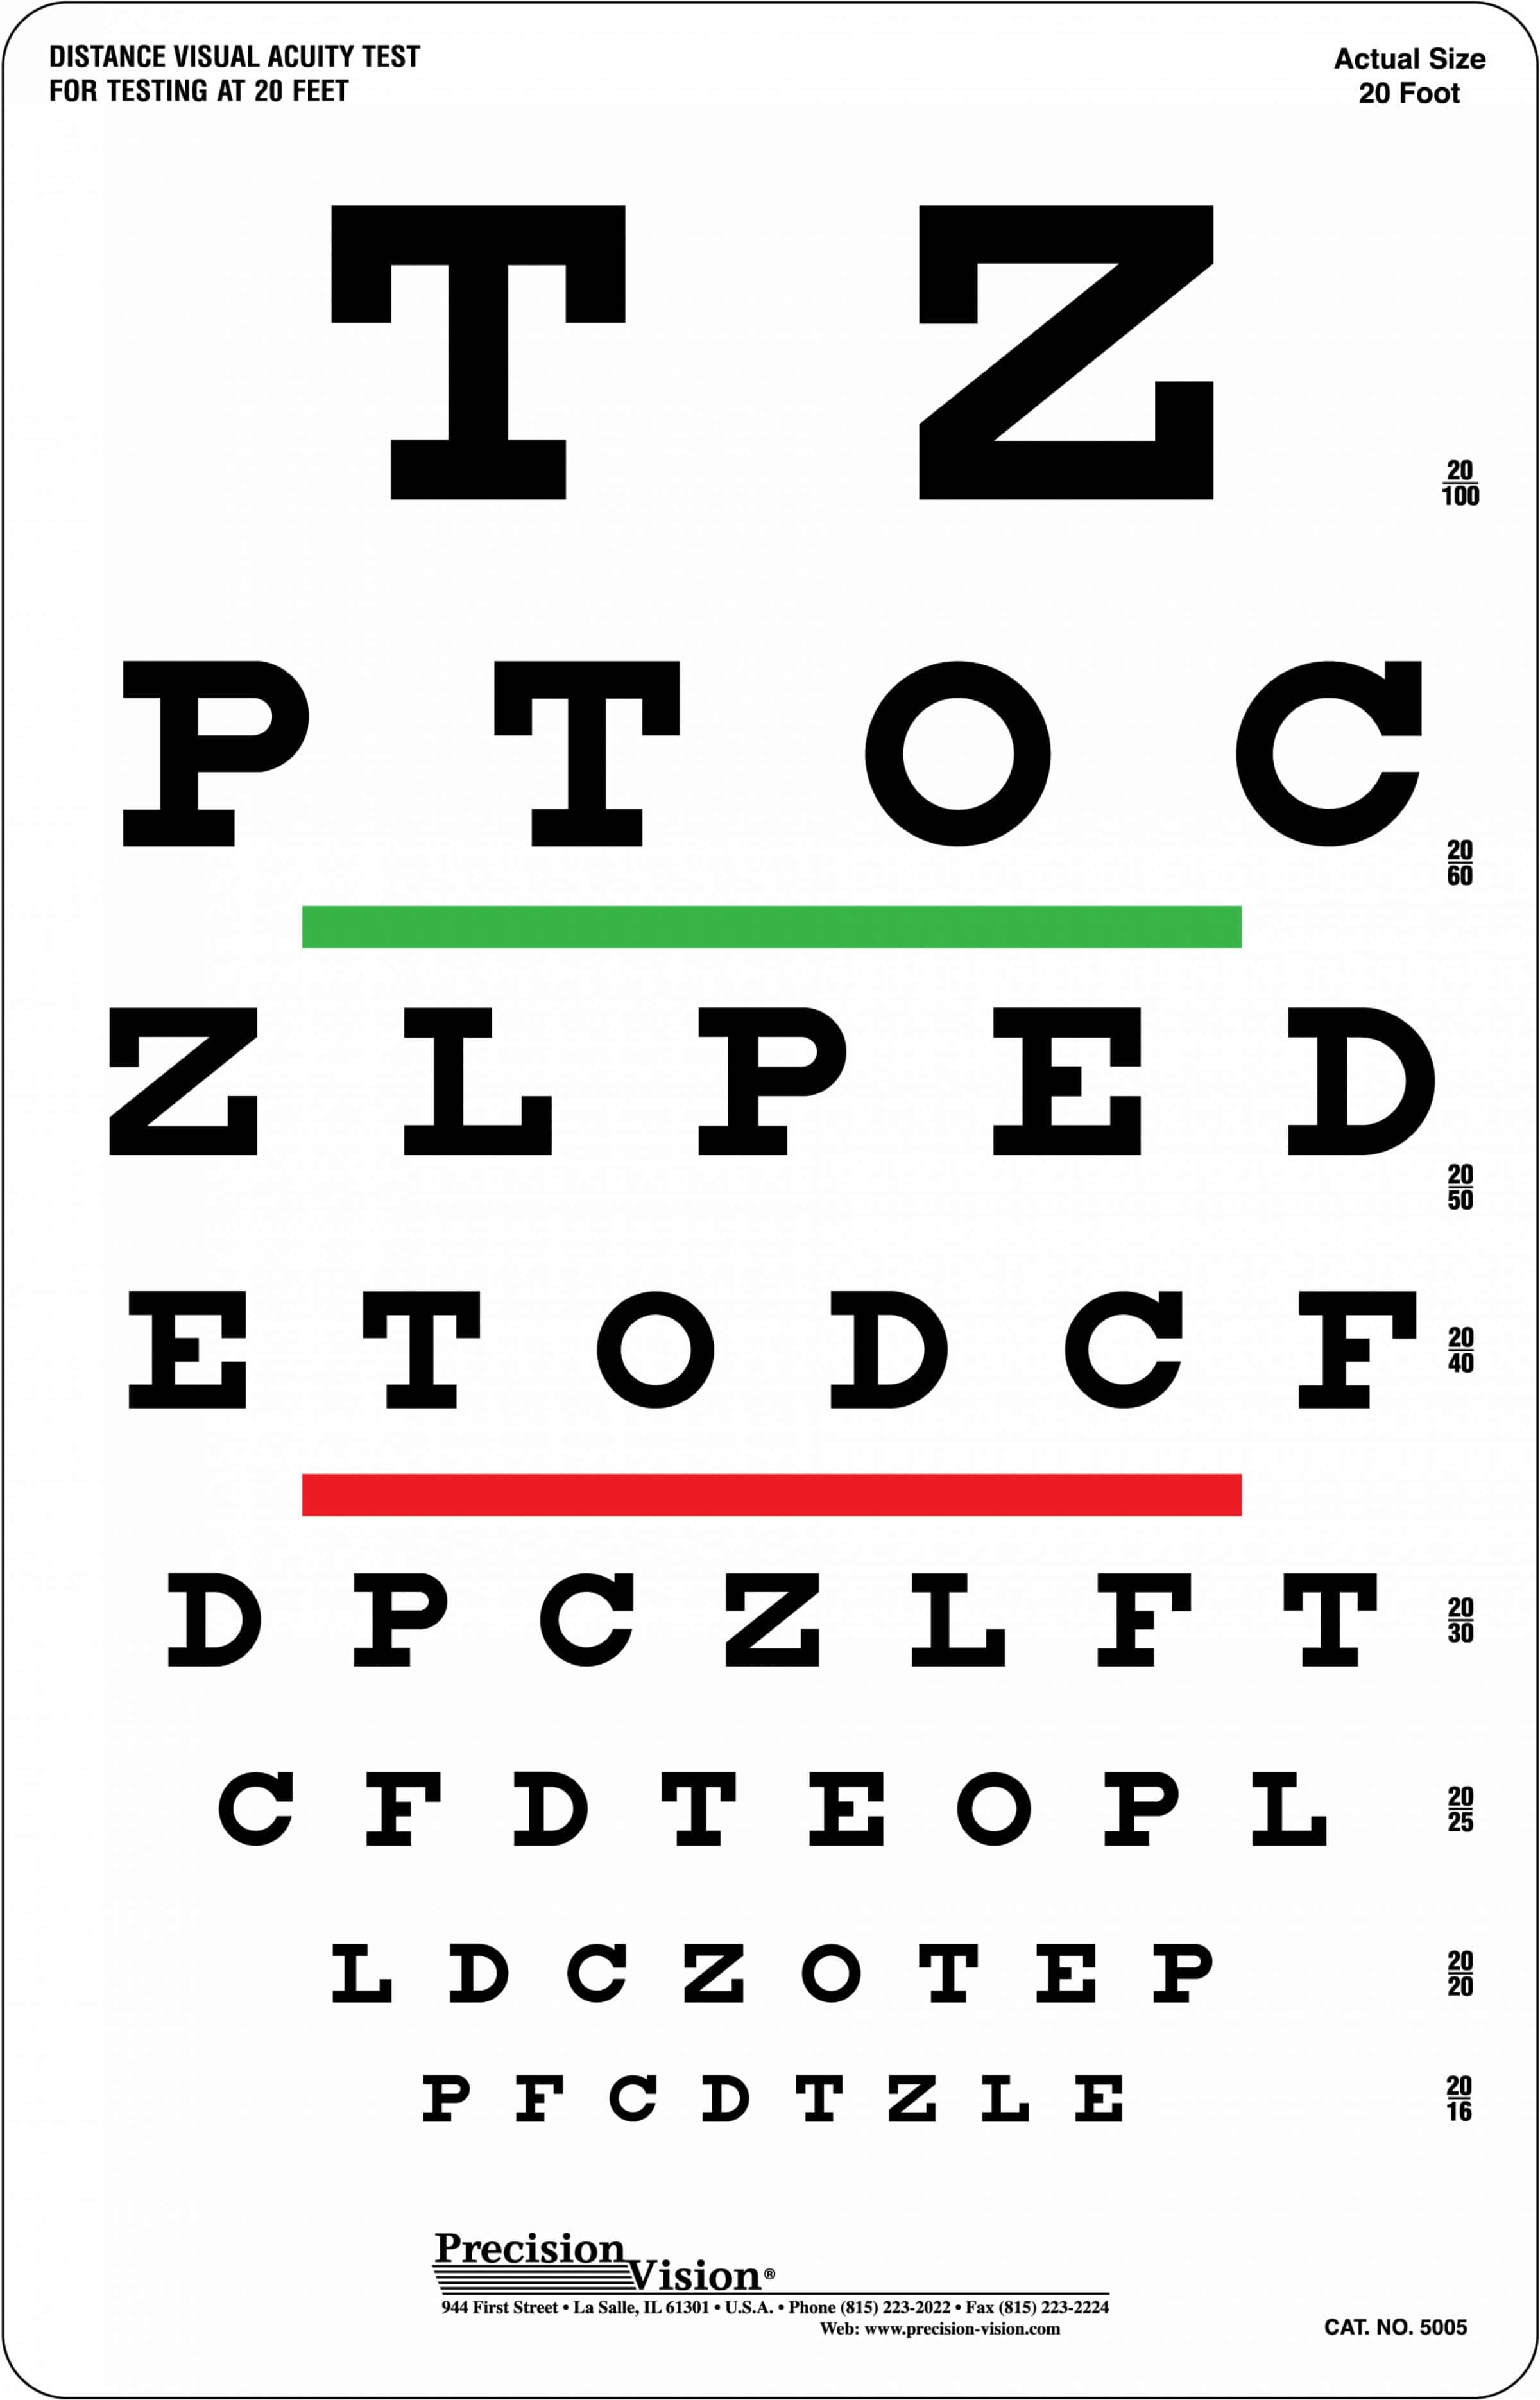 snellen-eye-chart-for-visual-acuity-and-color-vision-test-precision-vision